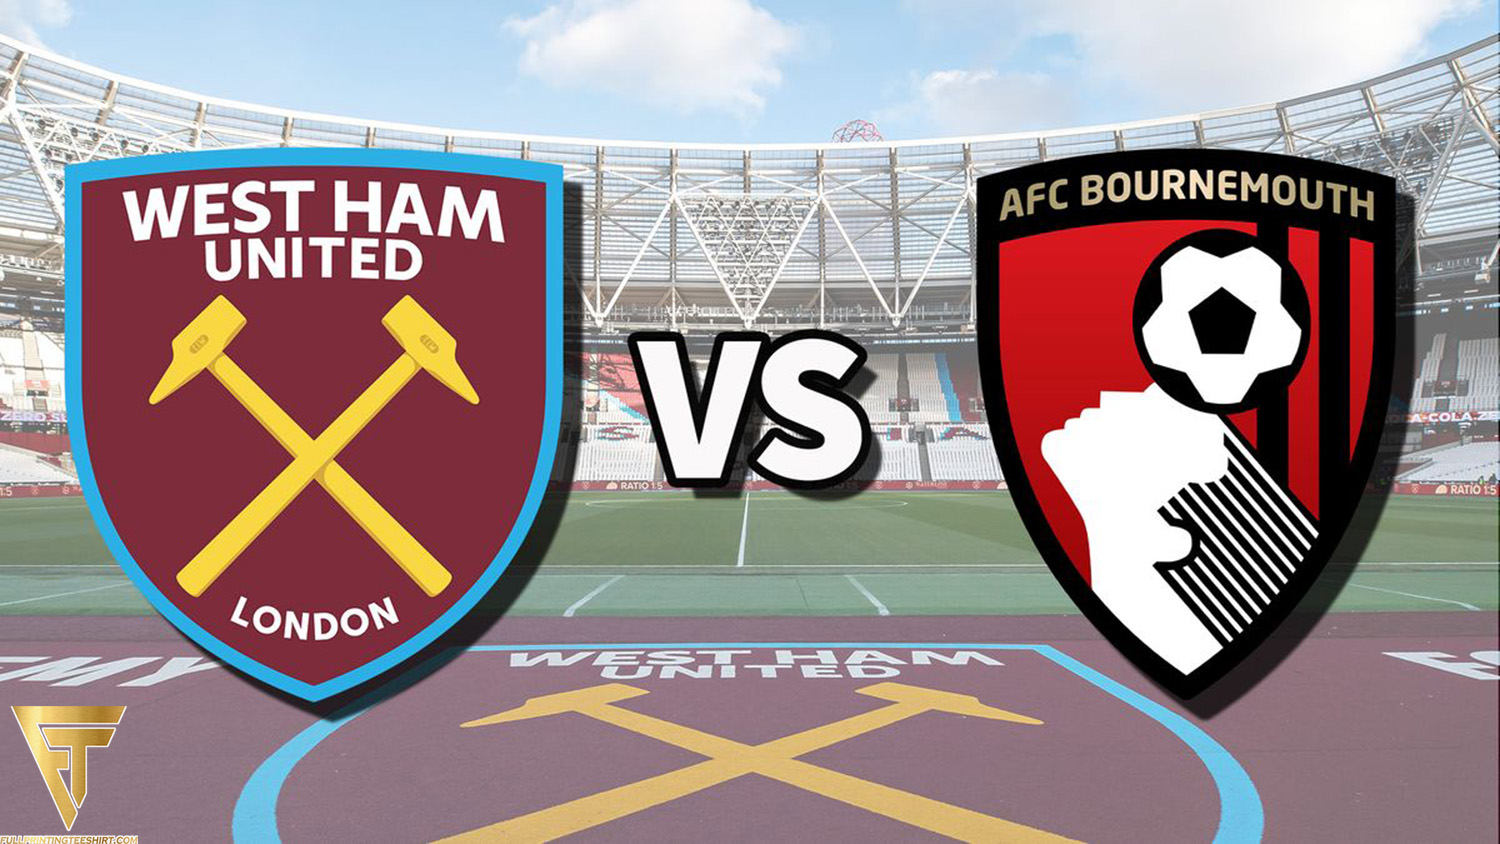 Premier League Showdown West Ham United vs AFC Bournemouth - A Tactical and Statistical Preview